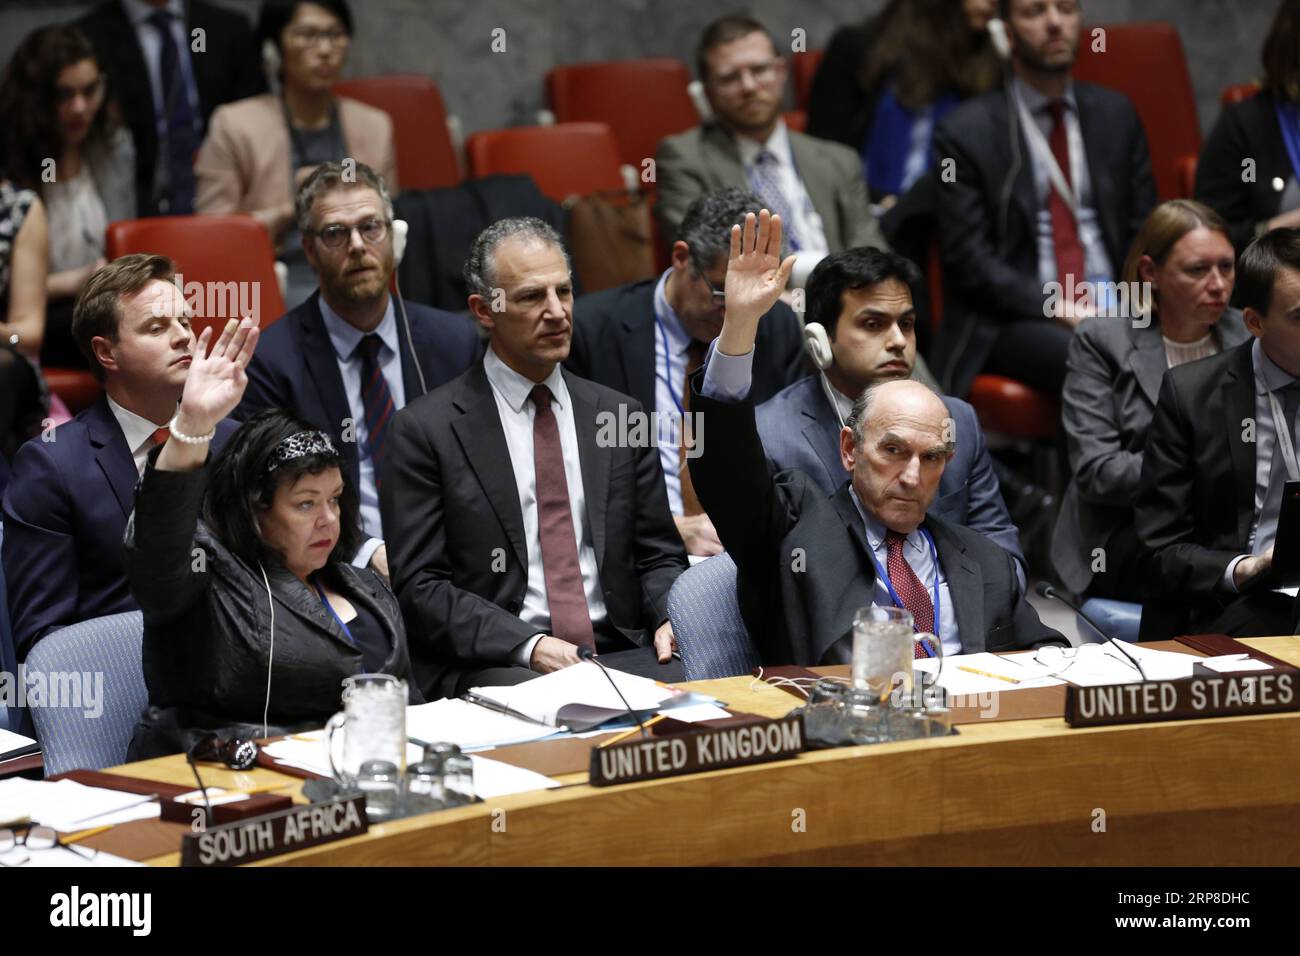 (190228) -- UNITED NATIONS, Feb. 28, 2019 -- U.S. Special Representative for Venezuela Elliott Abrams (R, front) and British Ambassador to the United Nations Karen Pierce (L, front) vote against a Russia-drafted resolution on Venezuela at the UN headquarters in New York, Feb. 28, 2019. The UN Security Council on Thursday failed to adopt two competing draft resolutions on Venezuela, sponsored by the United States and Russia respectively. ) UN-SECURITY COUNCIL-VENEZUELA-RESOLUTIONS-FAILING LixMuzi PUBLICATIONxNOTxINxCHN Stock Photo